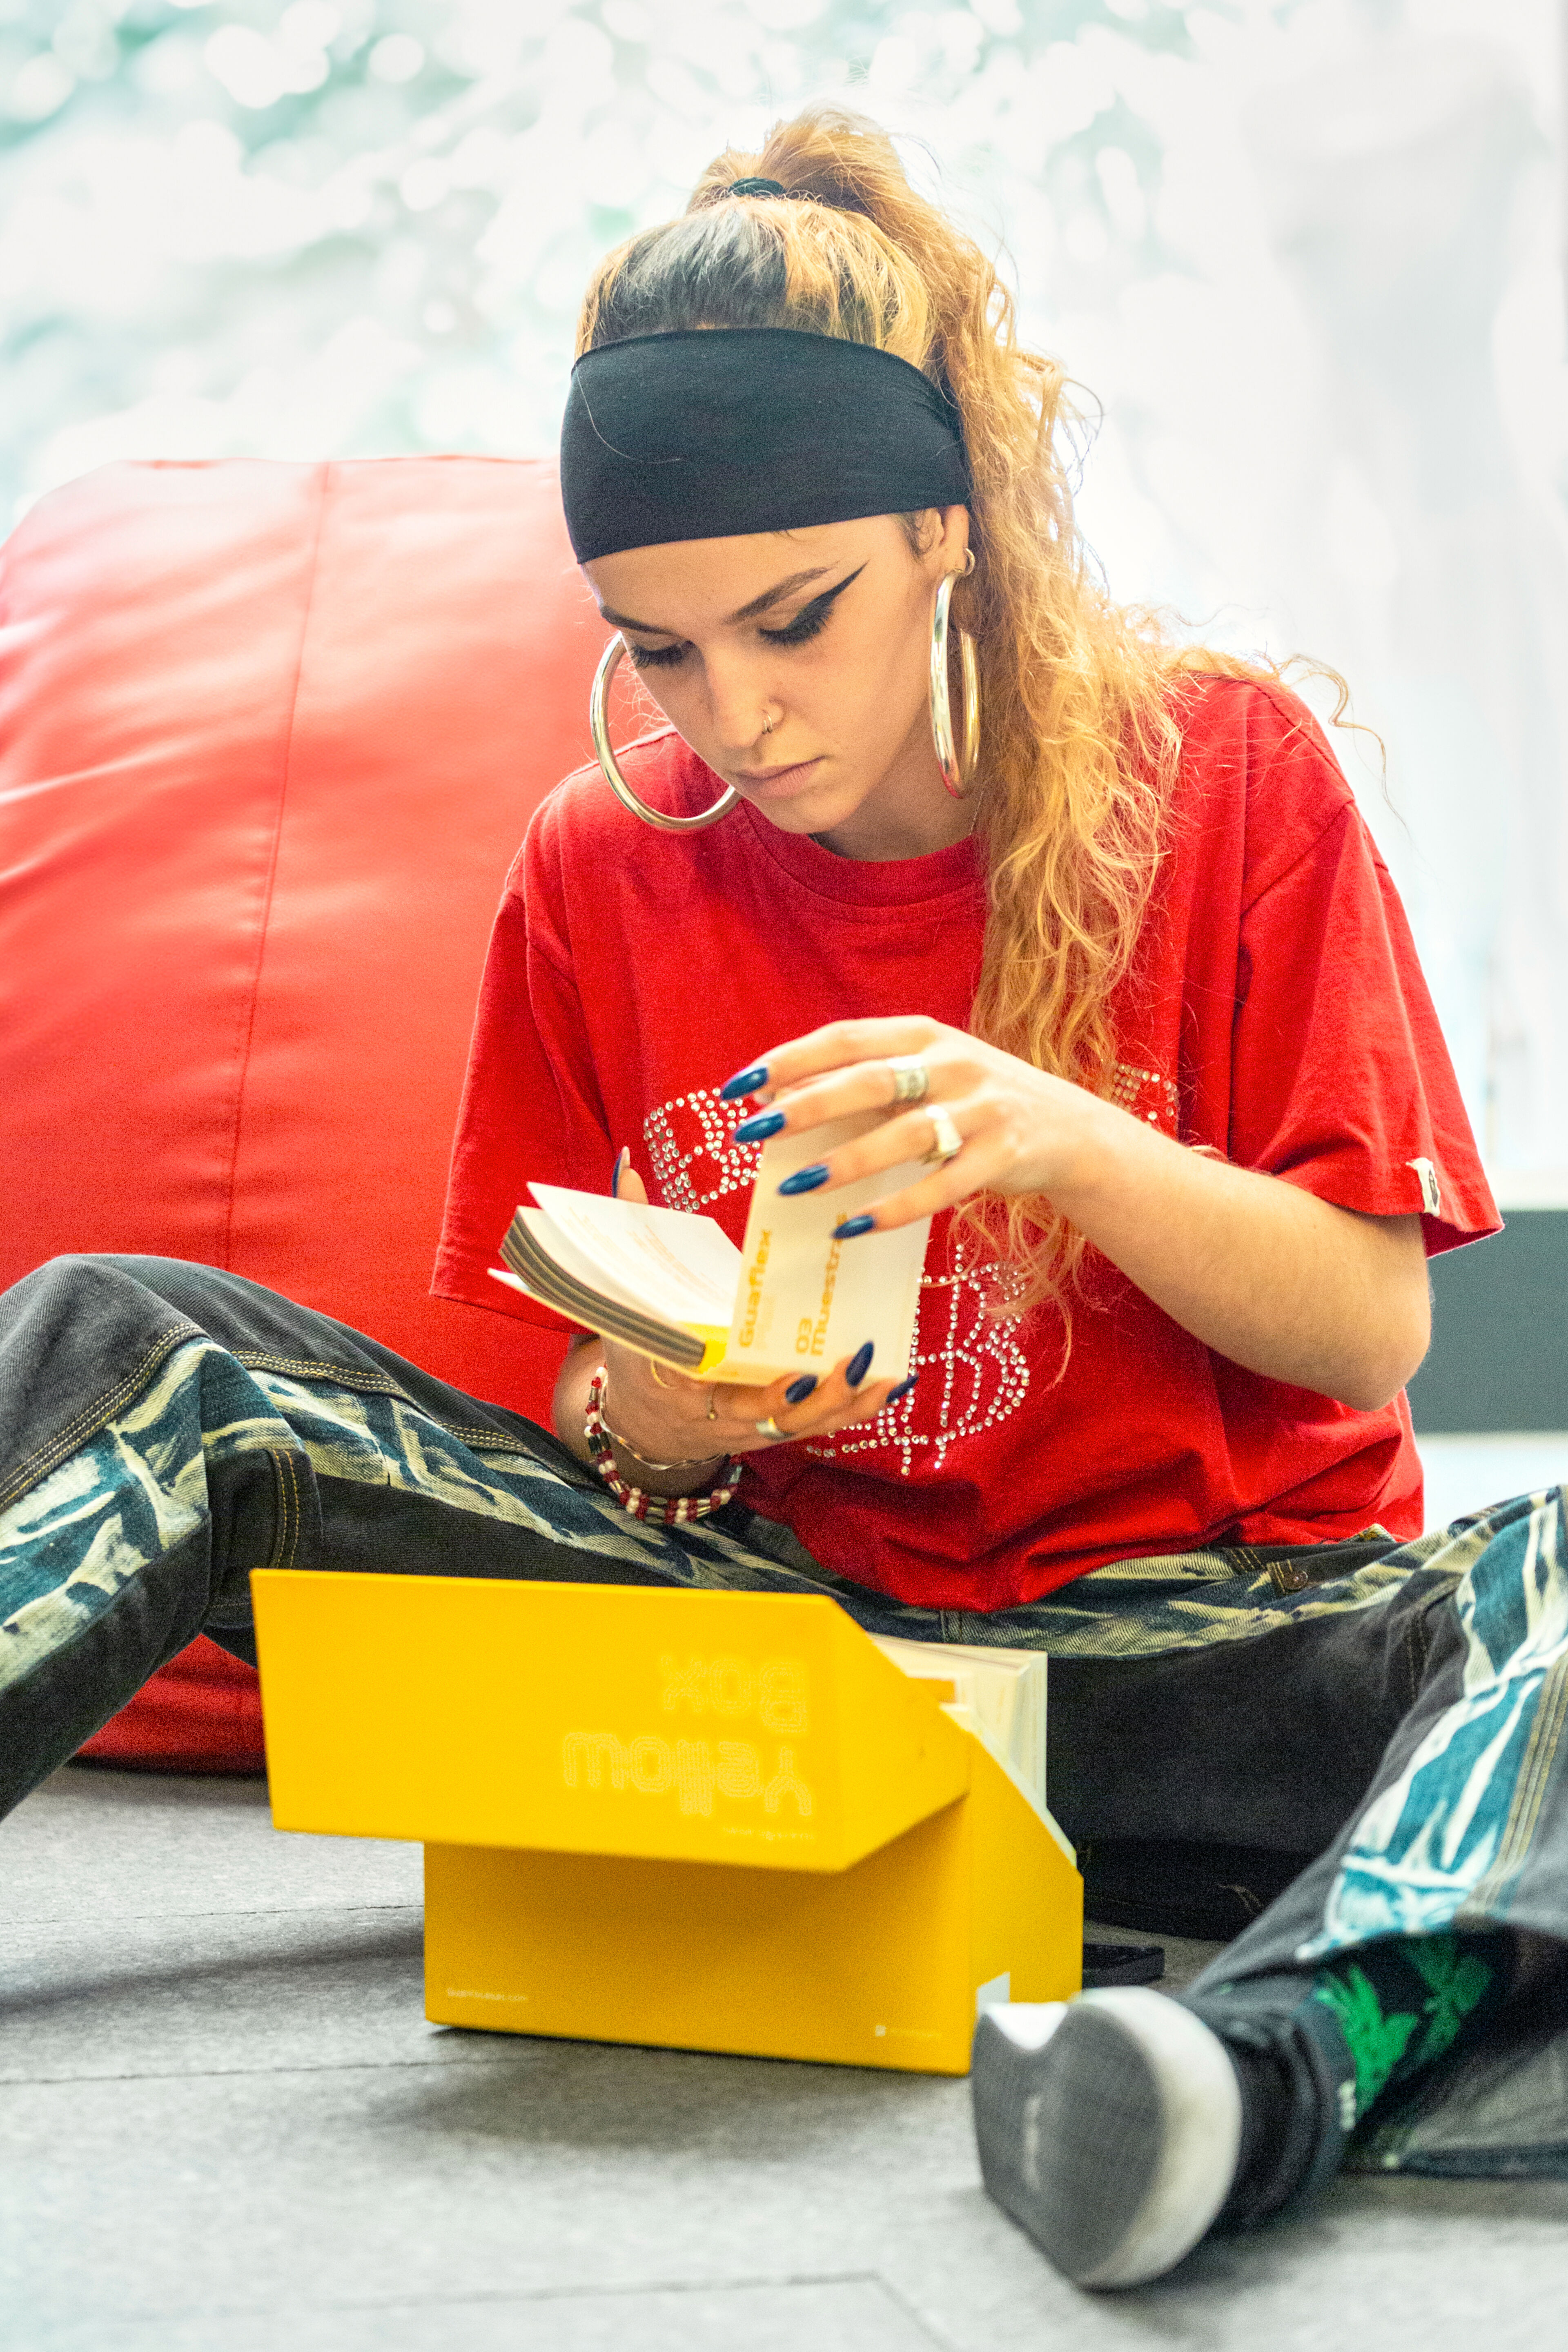  focused young woman in a red t-shirt and headband reads a book, sitting on the floor.